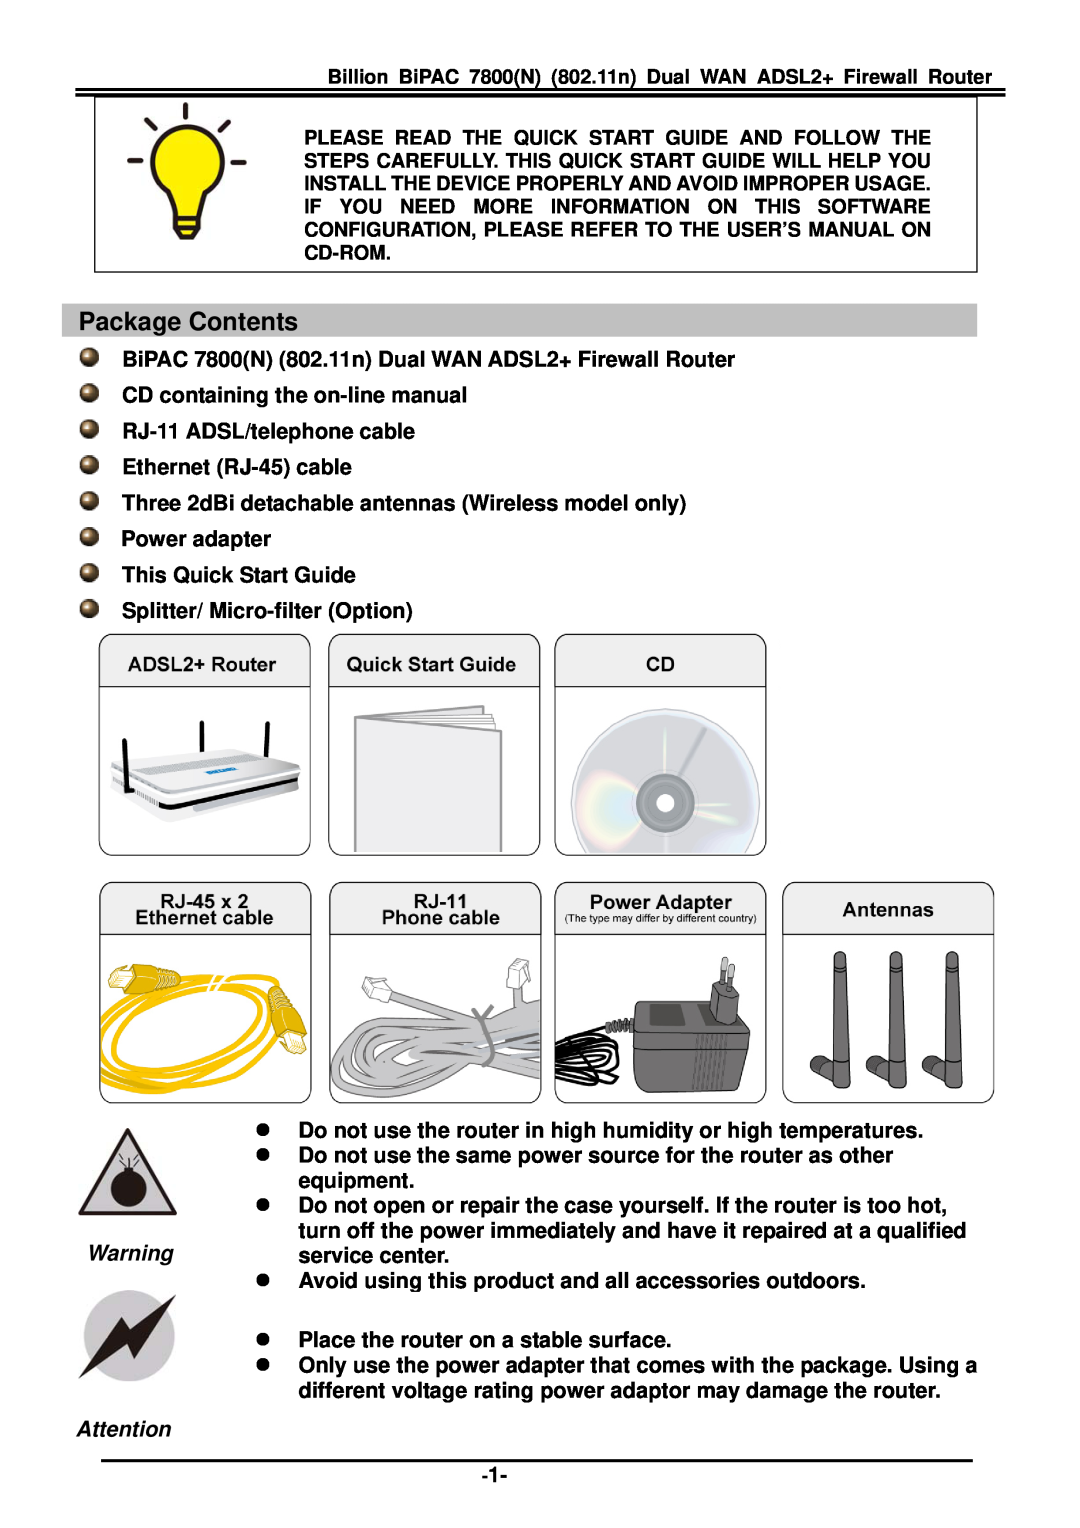 Billion Electric Company 7800(N) quick start Package Contents 